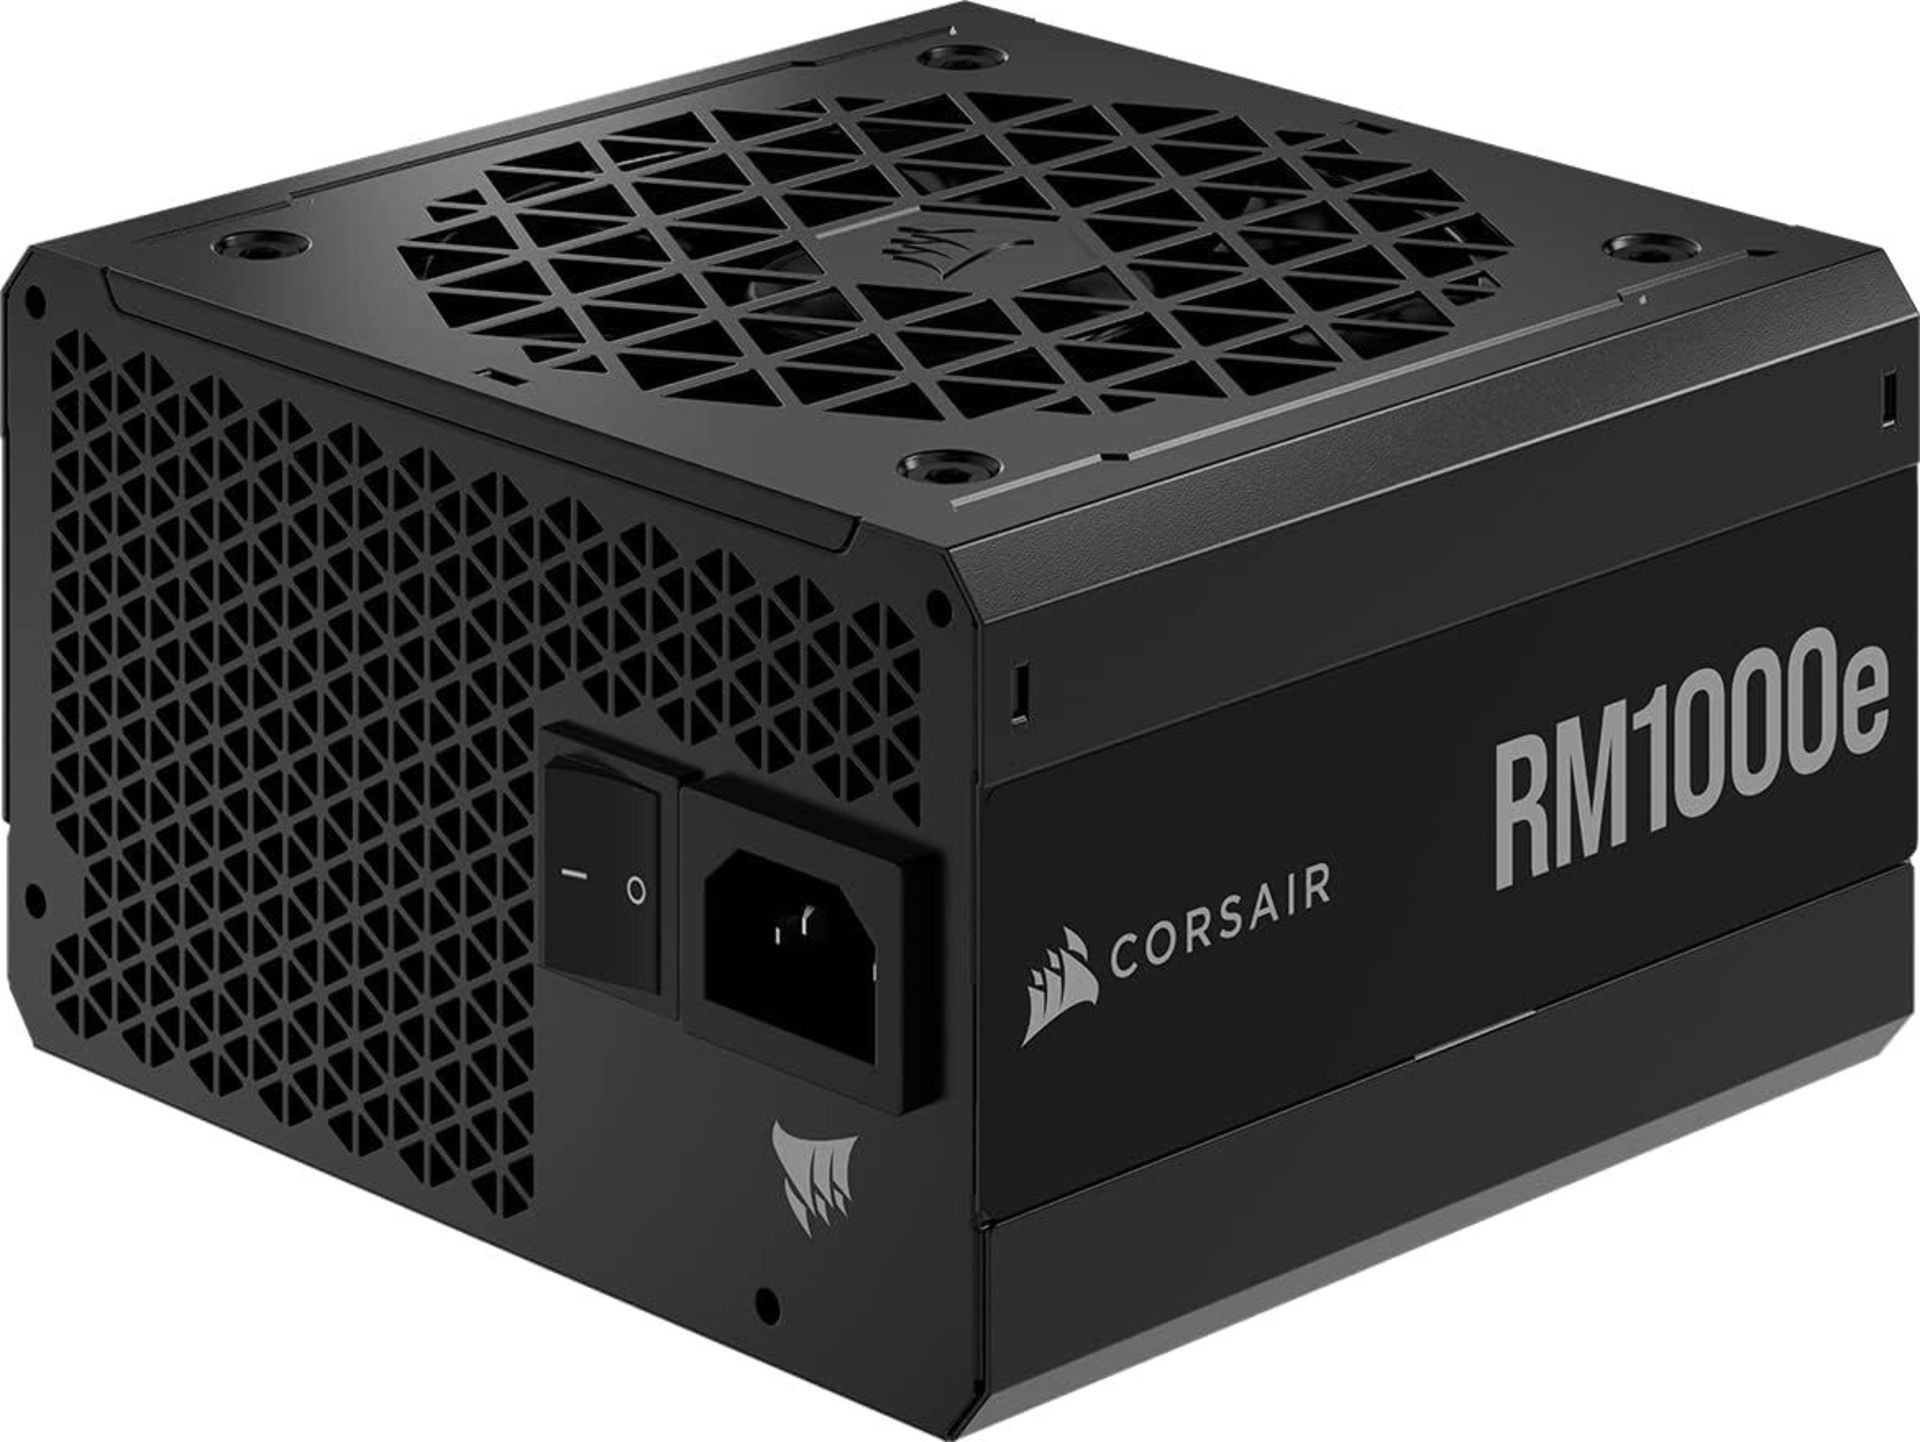 Corsair RM1000e Fully Modular Low-Noise ATX Power Supply (Dual EPS12V Connectors, 105°C-Rated